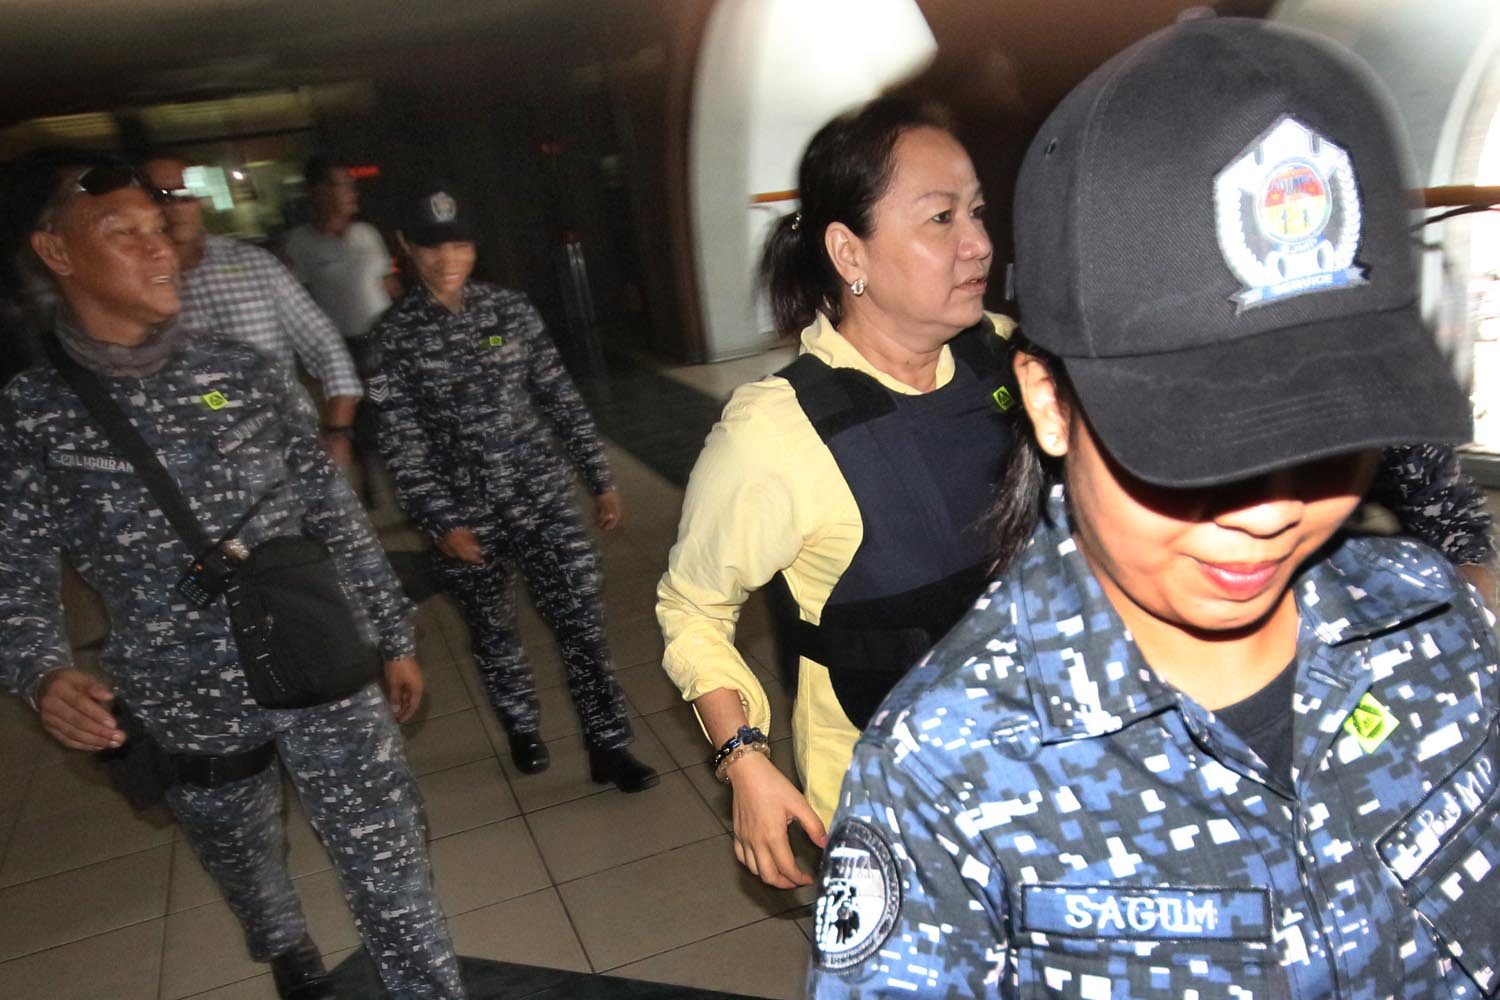 Pork barrel scam queen Napoles gets up to 100-year sentence over PDAF cases